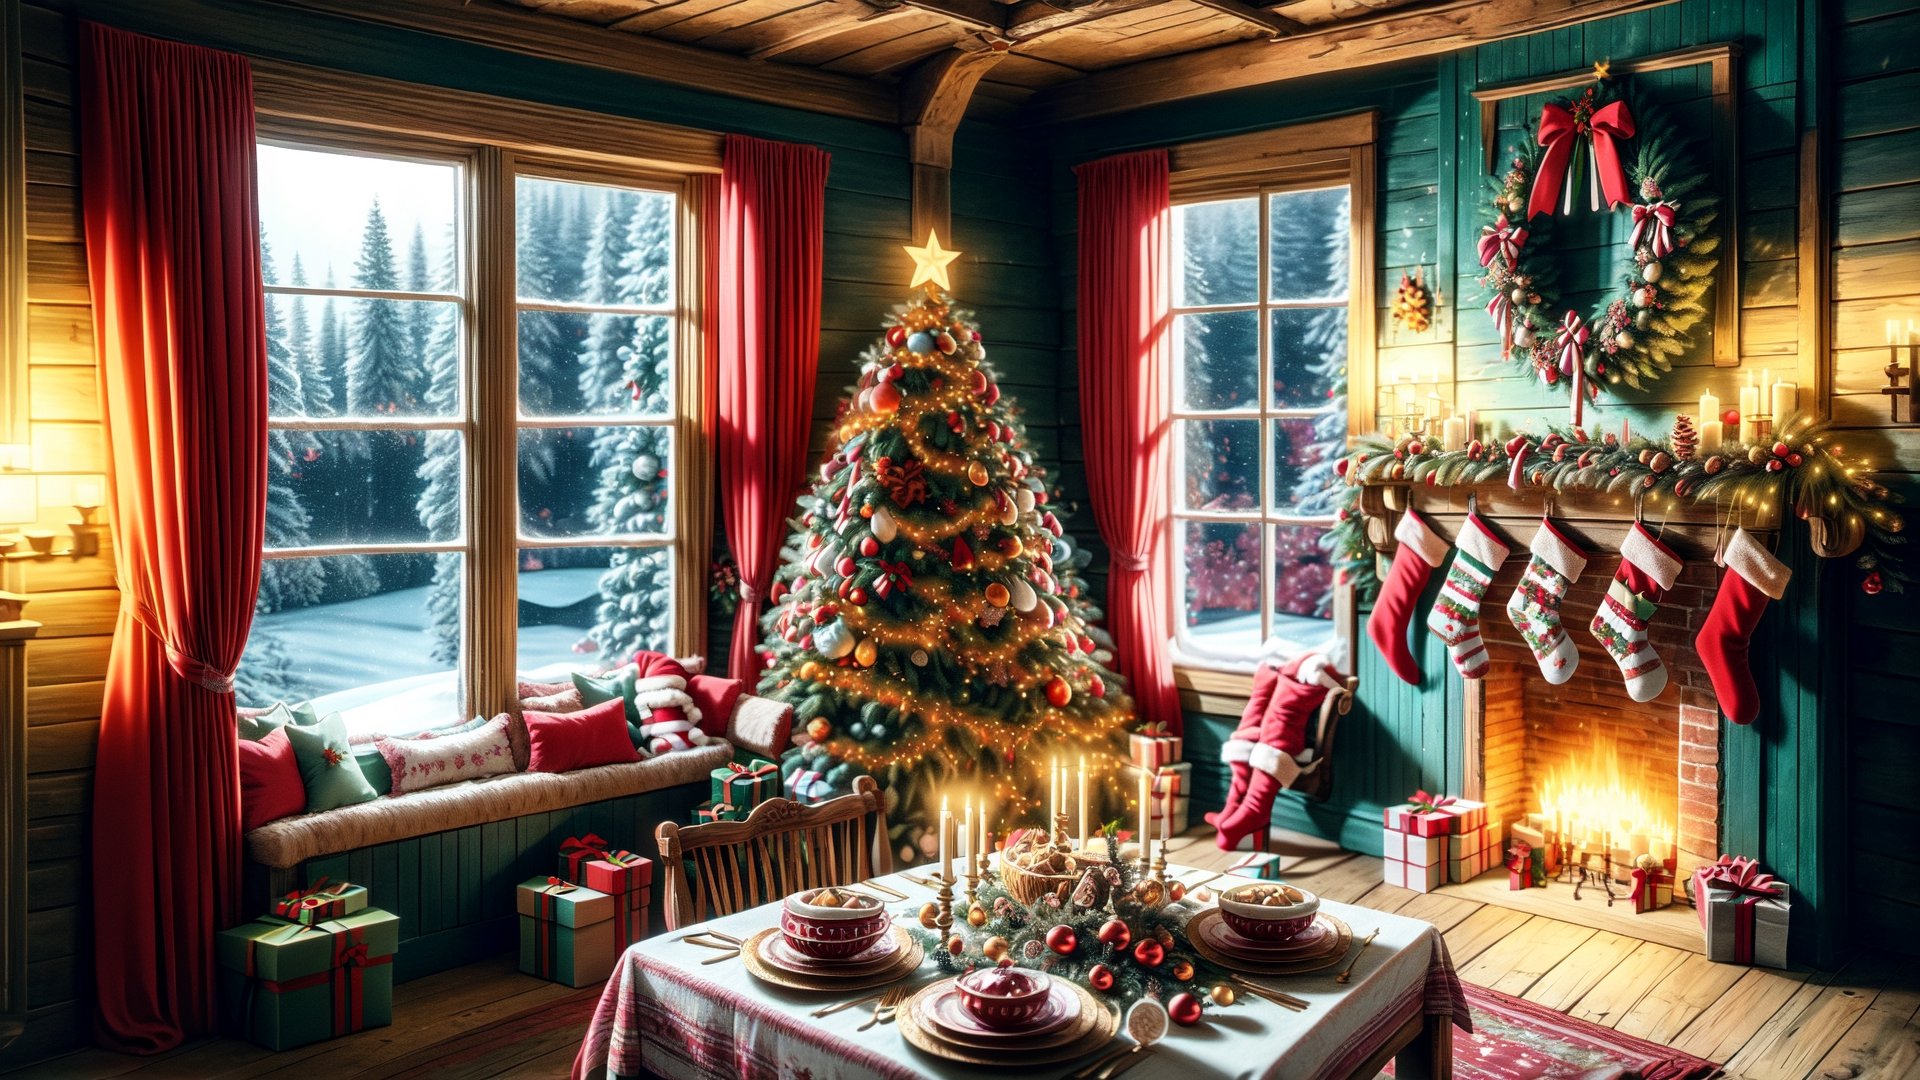 Christmas tea, window overlooking a magical forest, curtains on the window, magic, Christmas background, Mysterious, Mysterious,Christmas Room,Santa Claus,Abstract,Christmas,
There is a lot of snow outside the window.